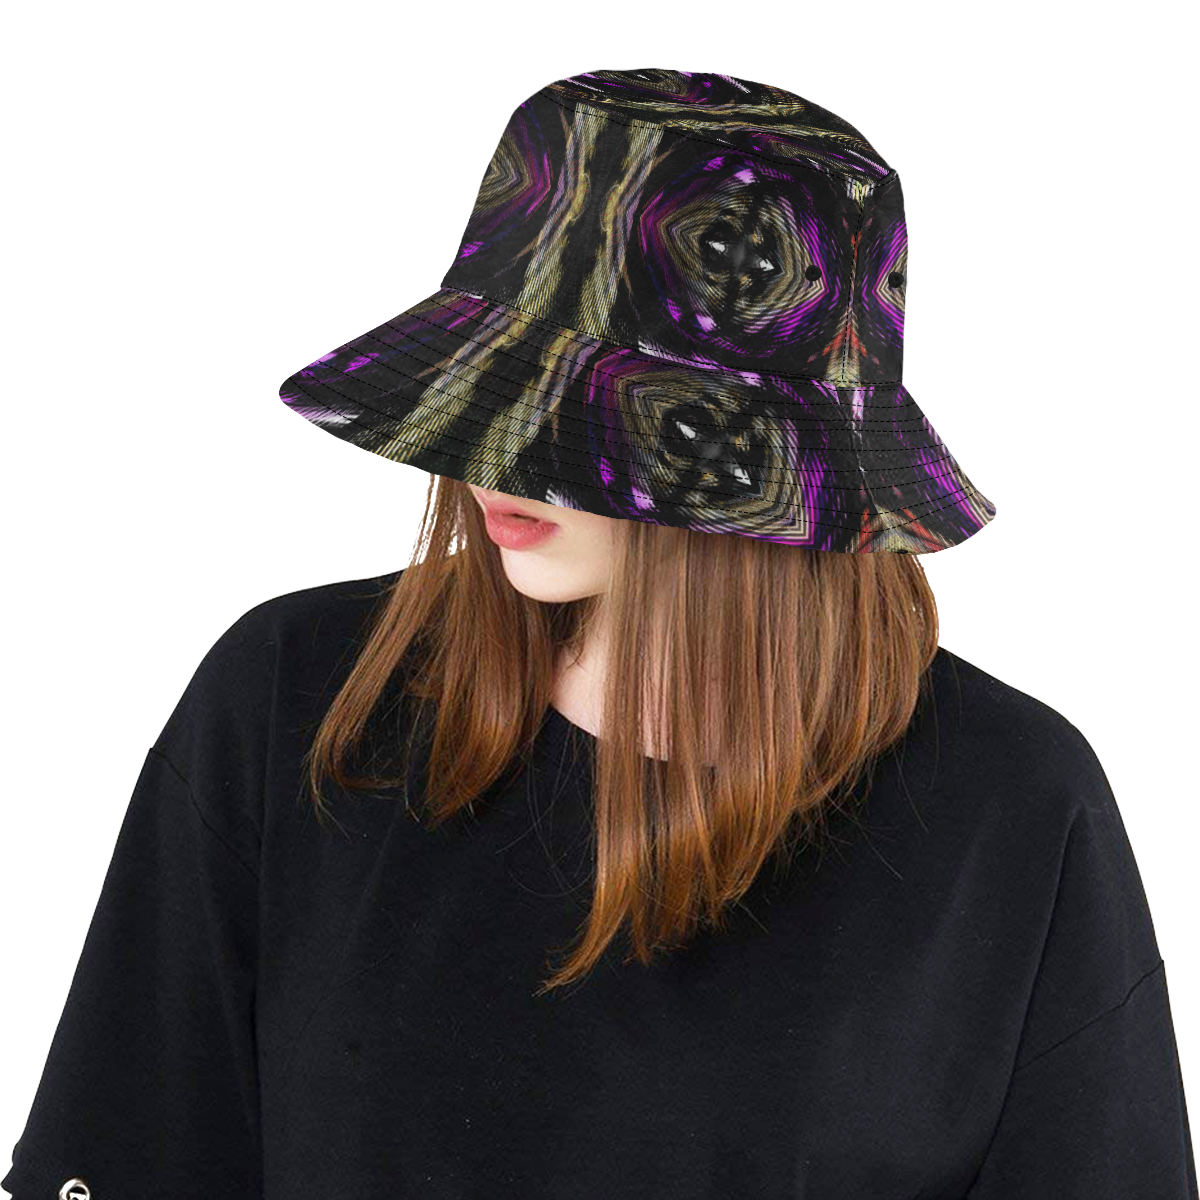 sml 5000DUBLE 55 A All Over Print Bucket Hat